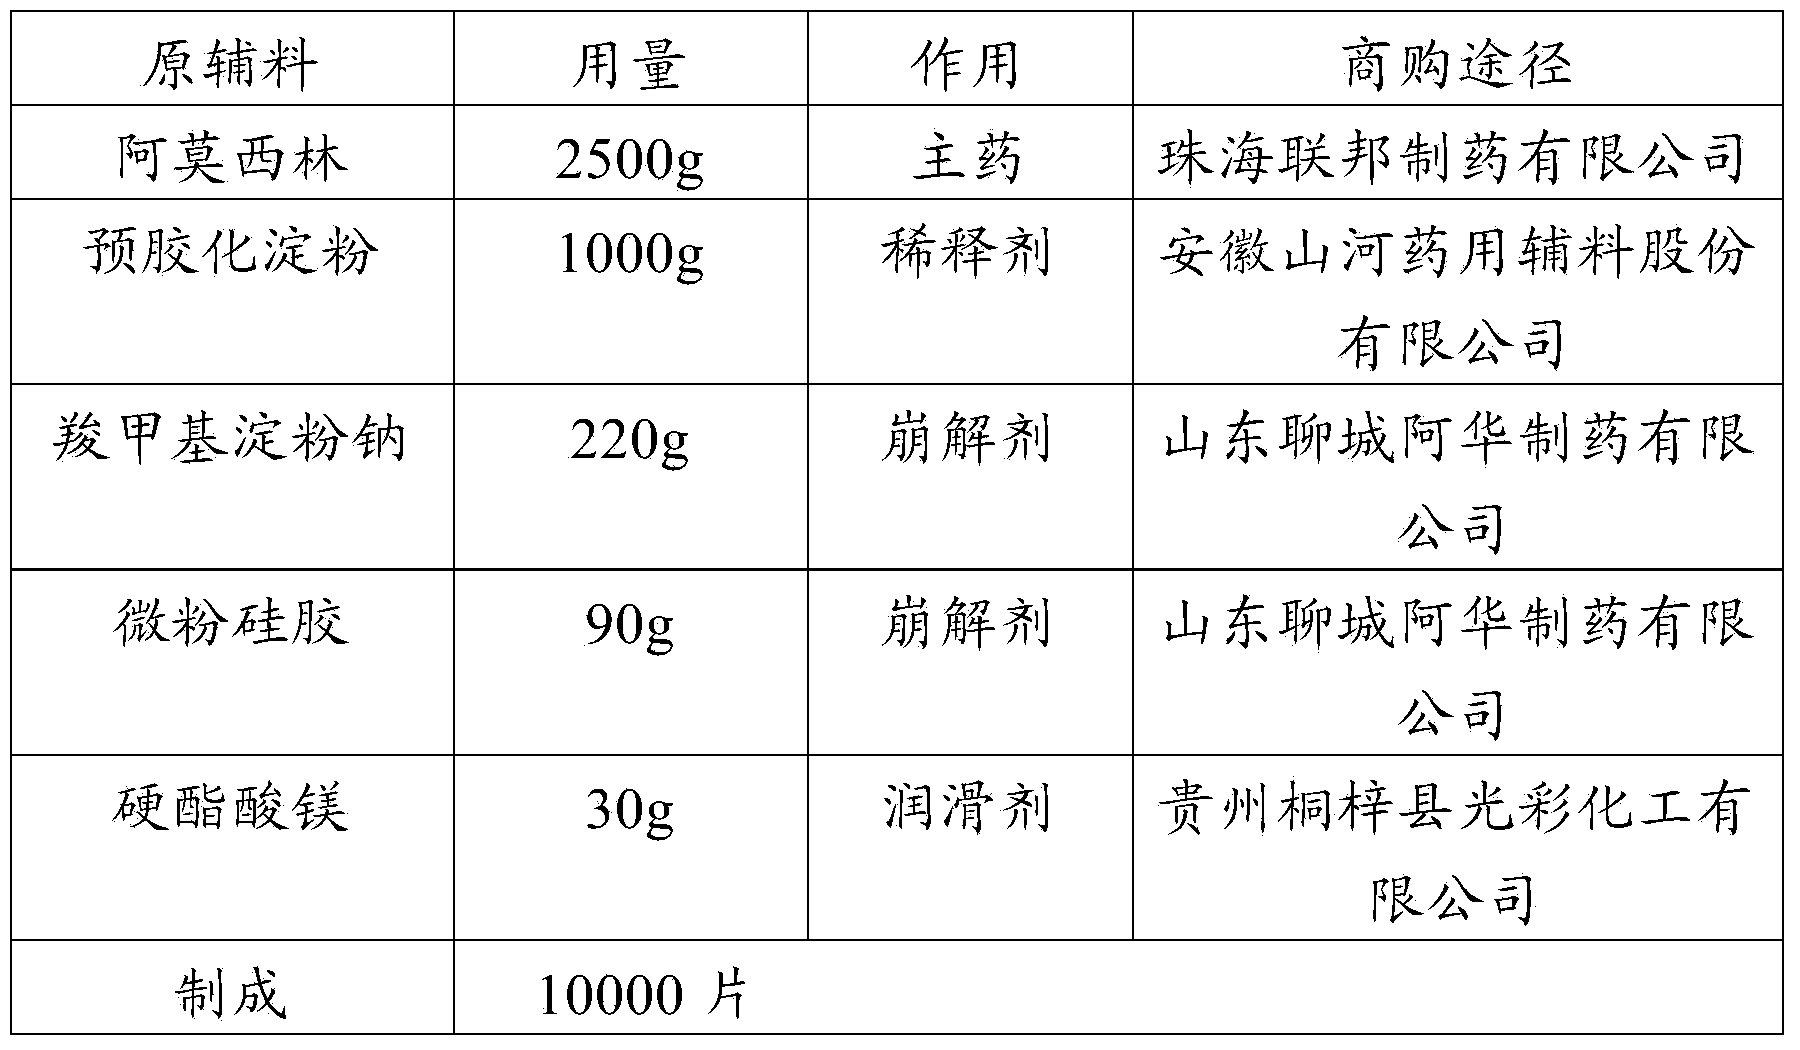 Stable amoxicillin tablet composition, as well as preparation method and application thereof